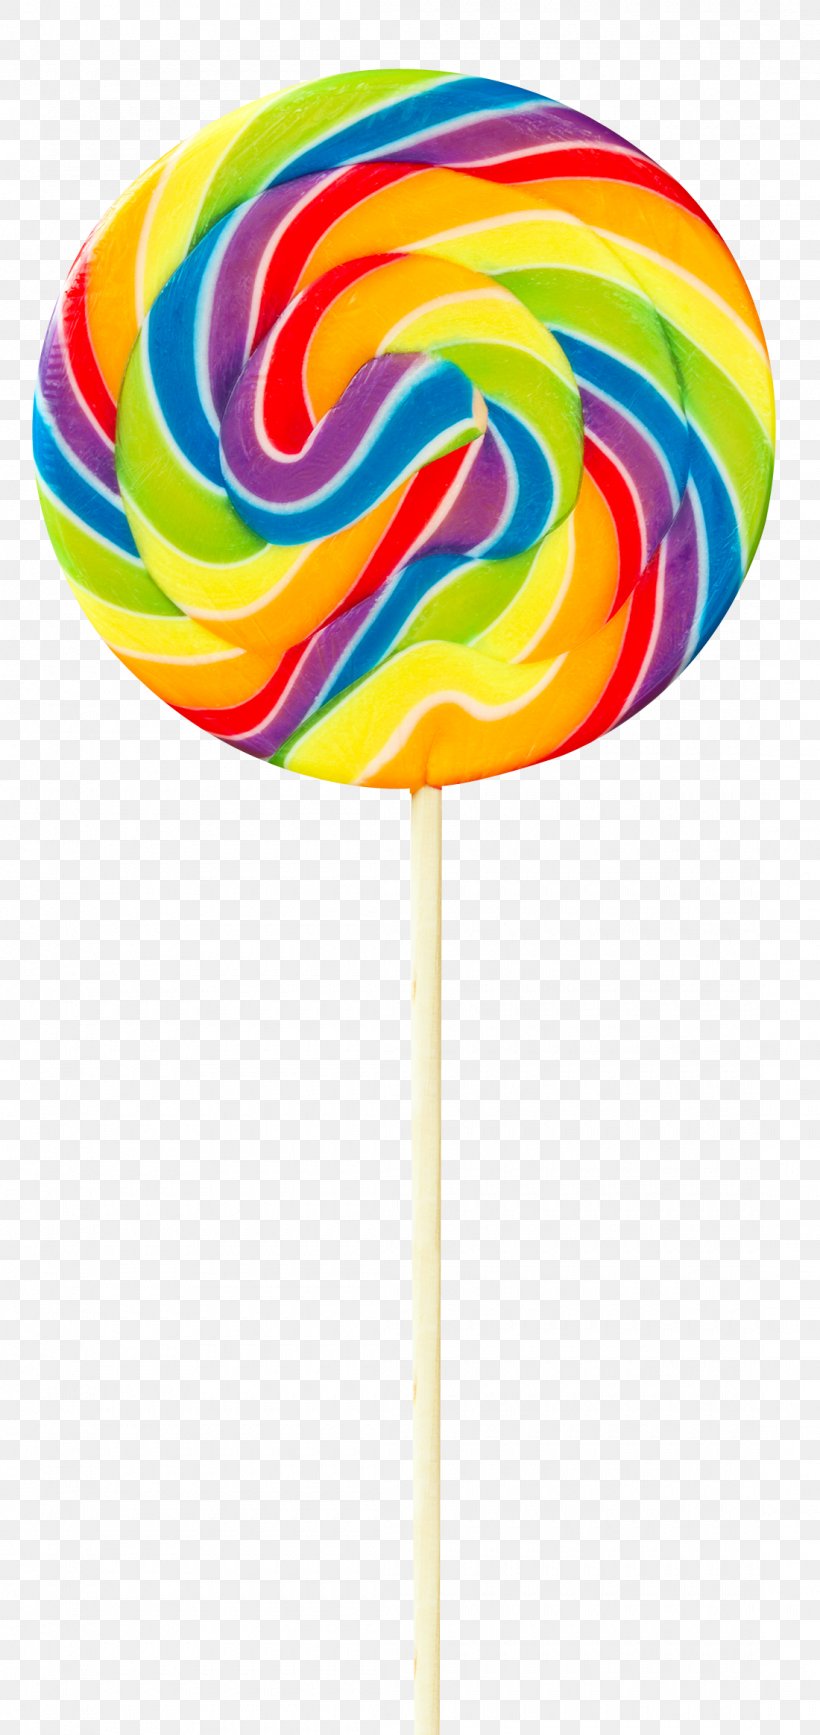 Candy Lollipop Stick Candy Gummi Candy Ice Cream, PNG, 1100x2328px, Lollipop, Candy, Candy Lollipop, Caramel, Chocolate Download Free